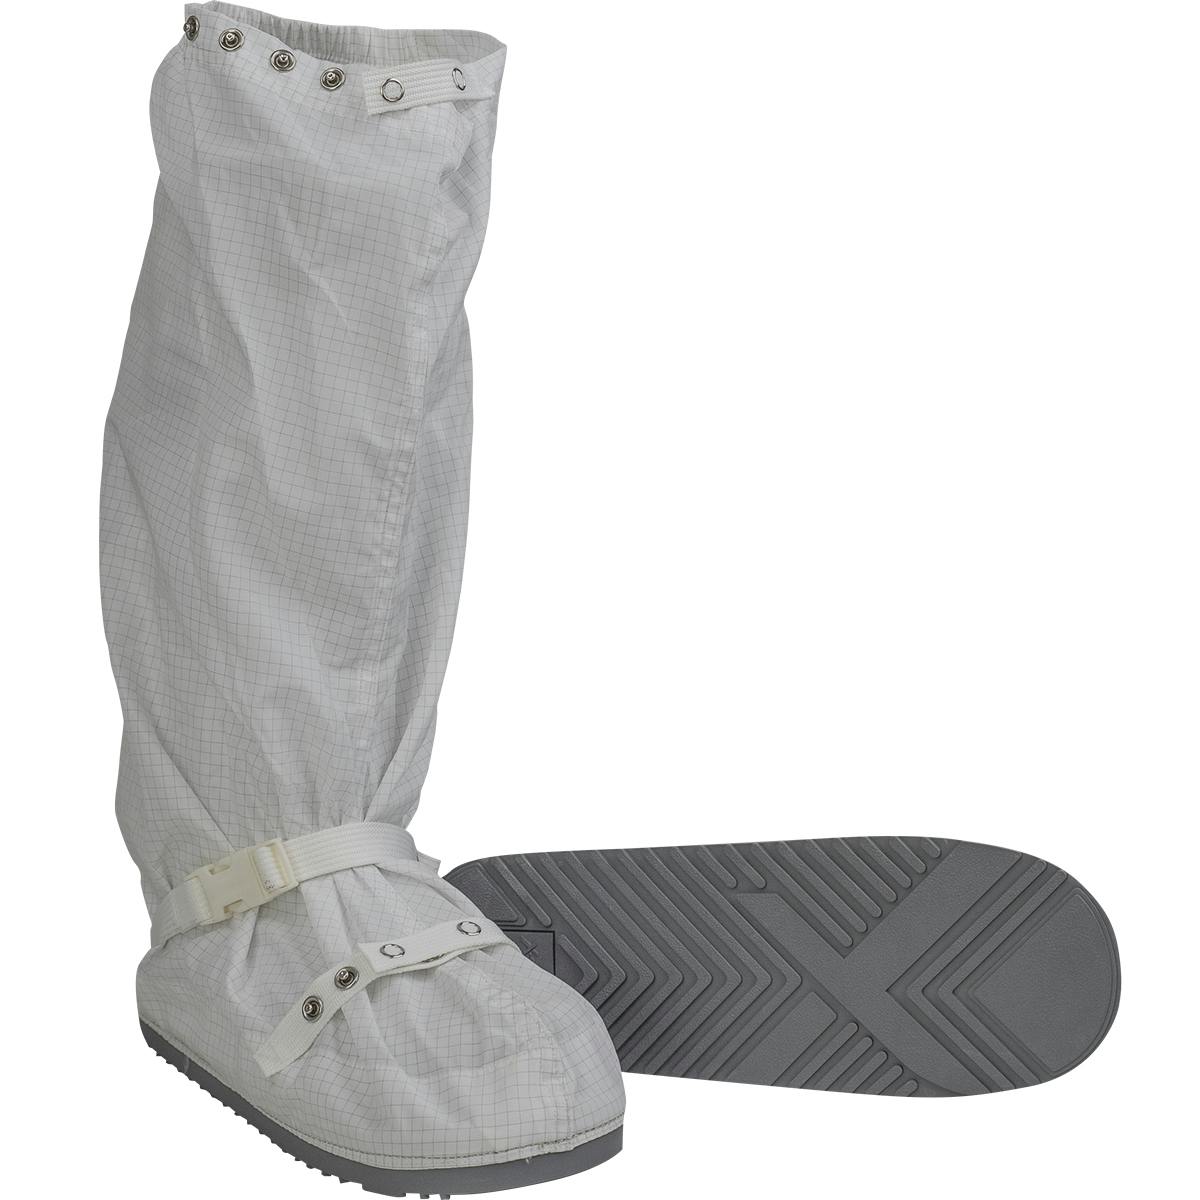 Altessa Grid ISO 5 (Class 100) Cleanroom Boot, White (CBPX-74WH)